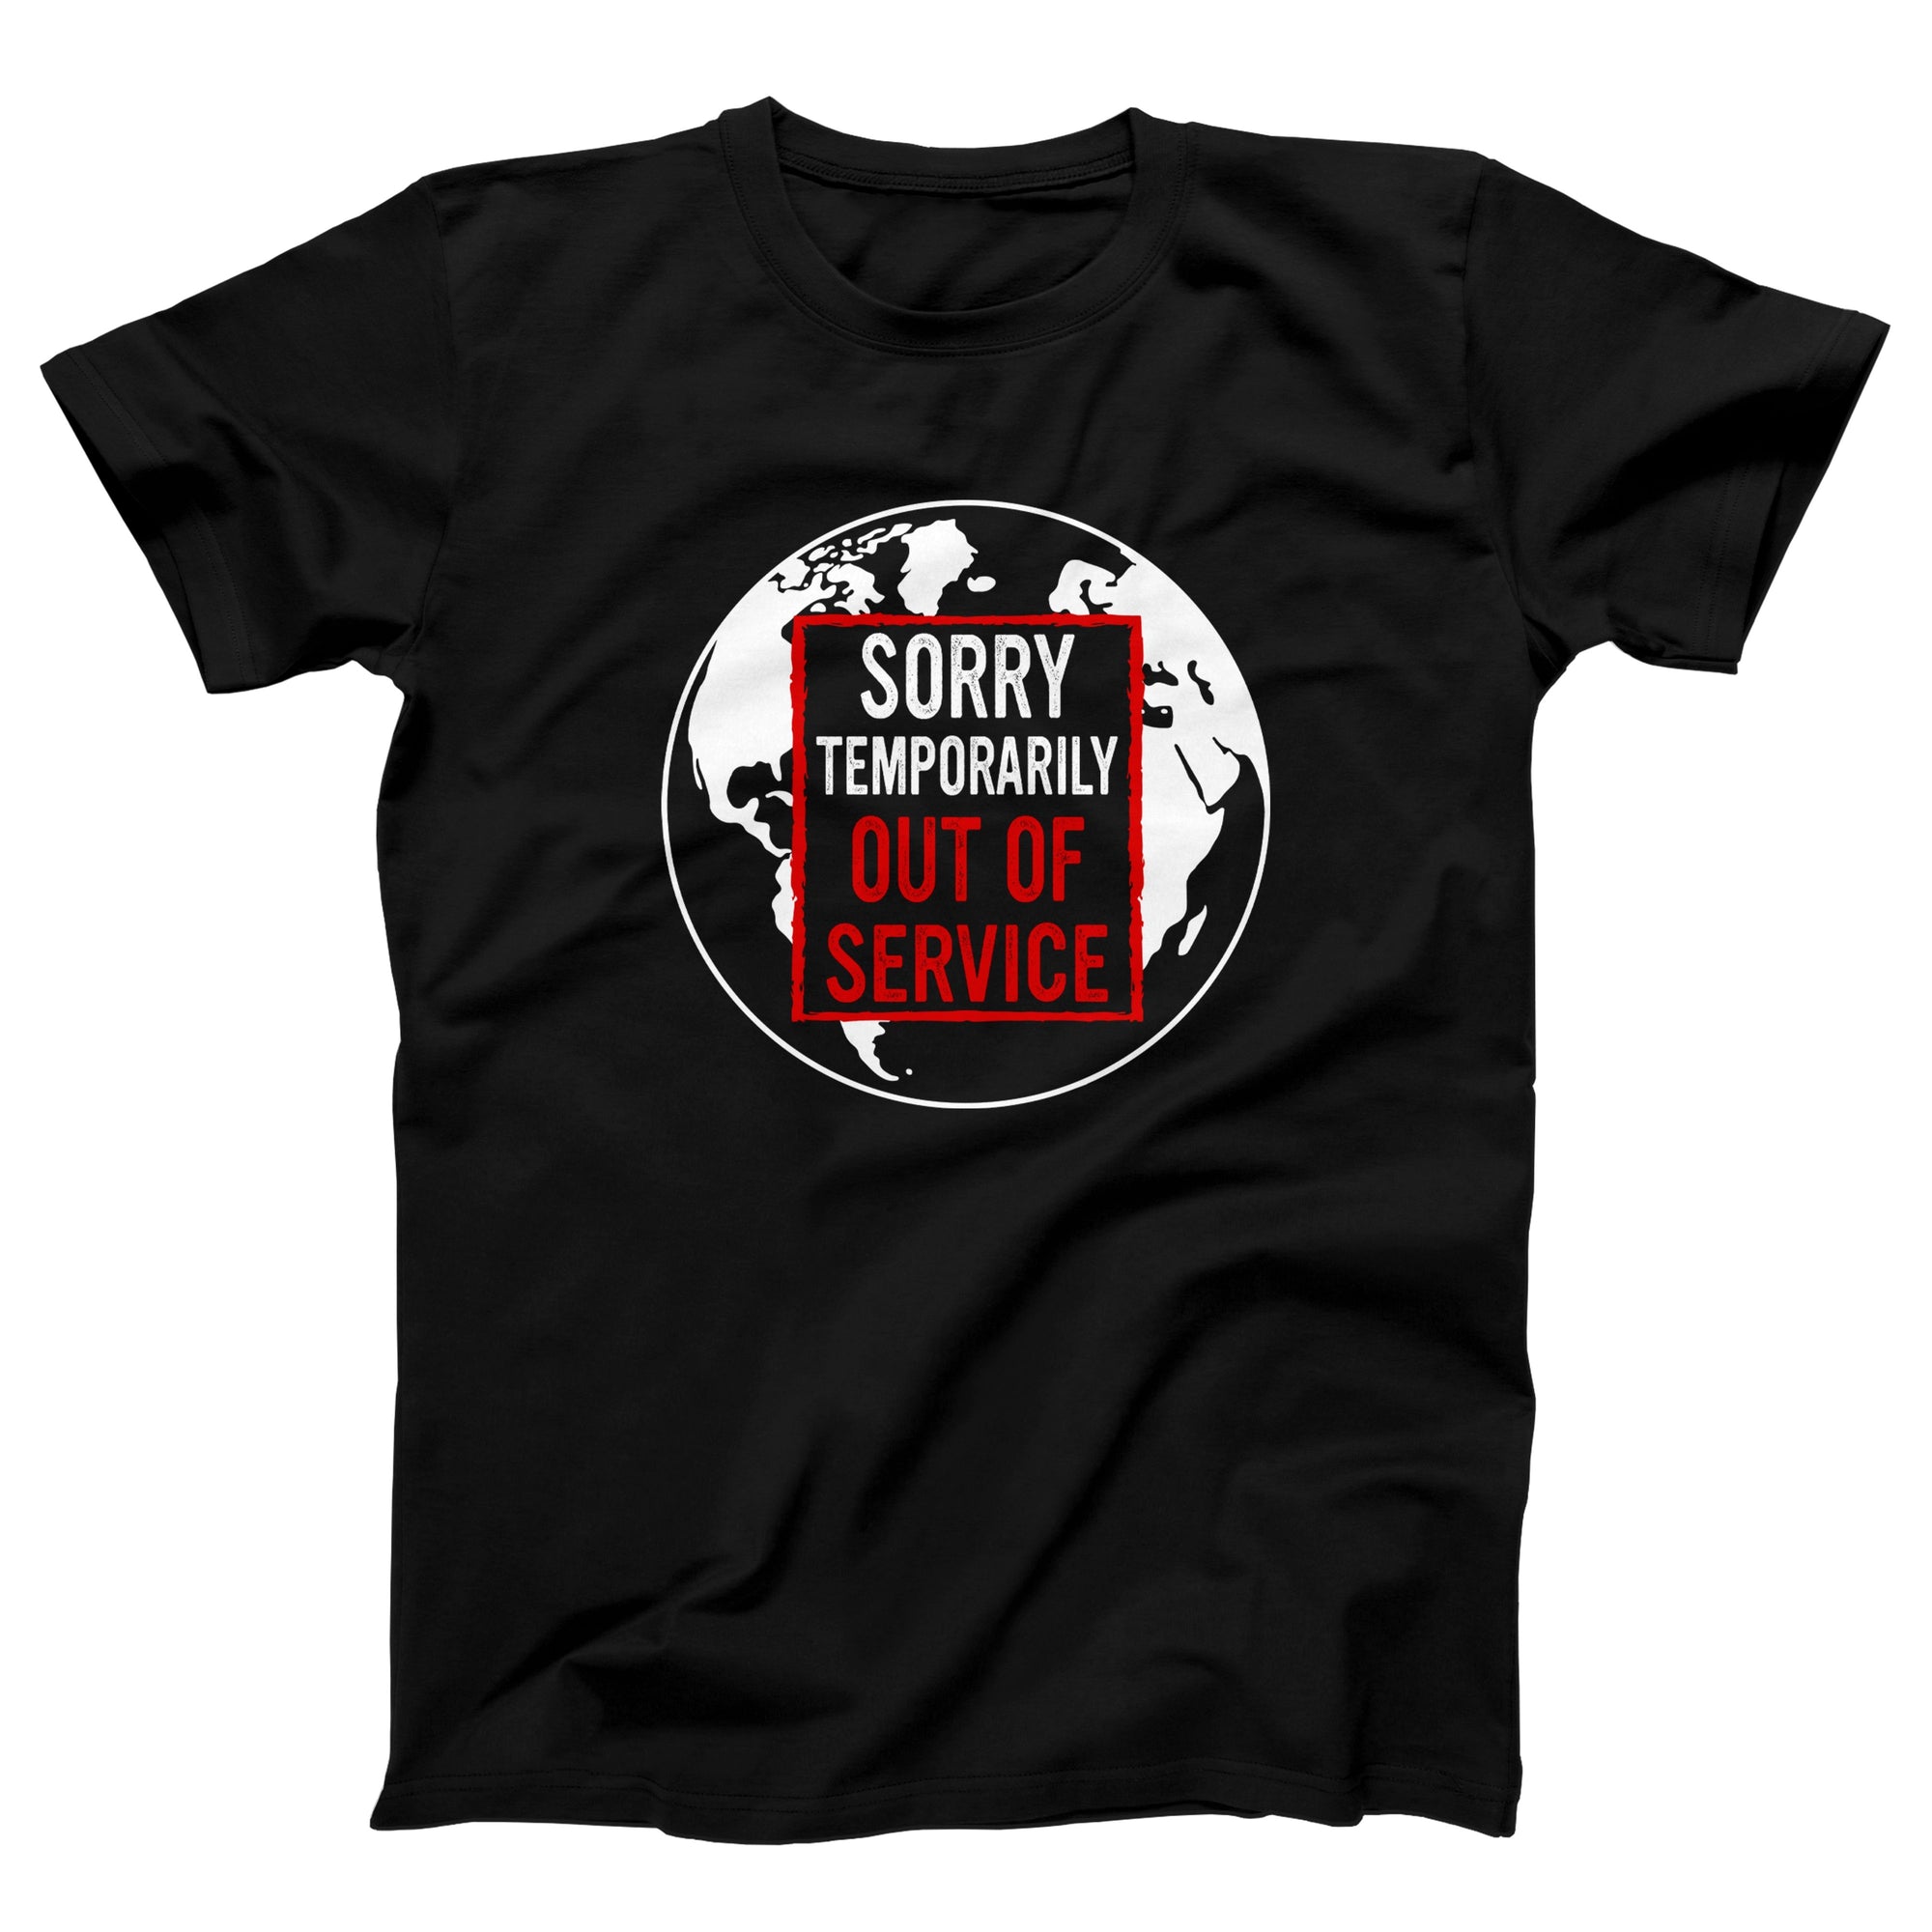 Sorry Temporarily Out of Service Adult Unisex T-Shirt